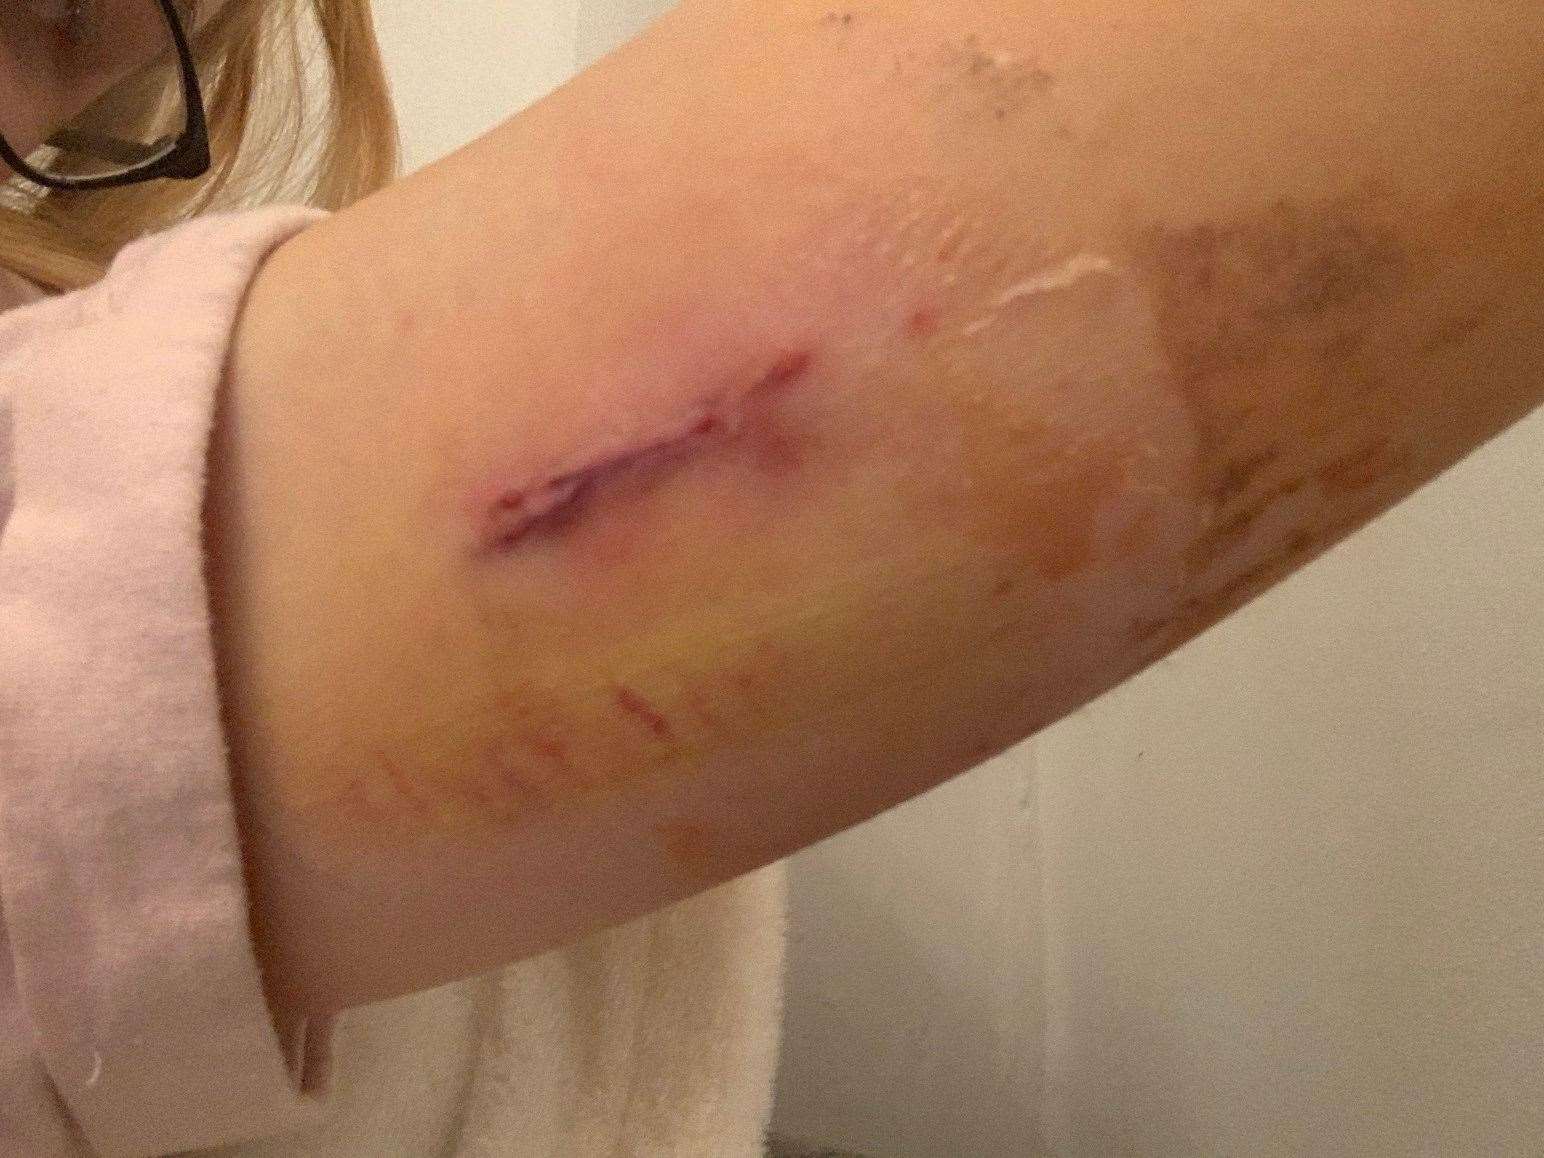 The implant is deep in her arm. Picture: SWNS